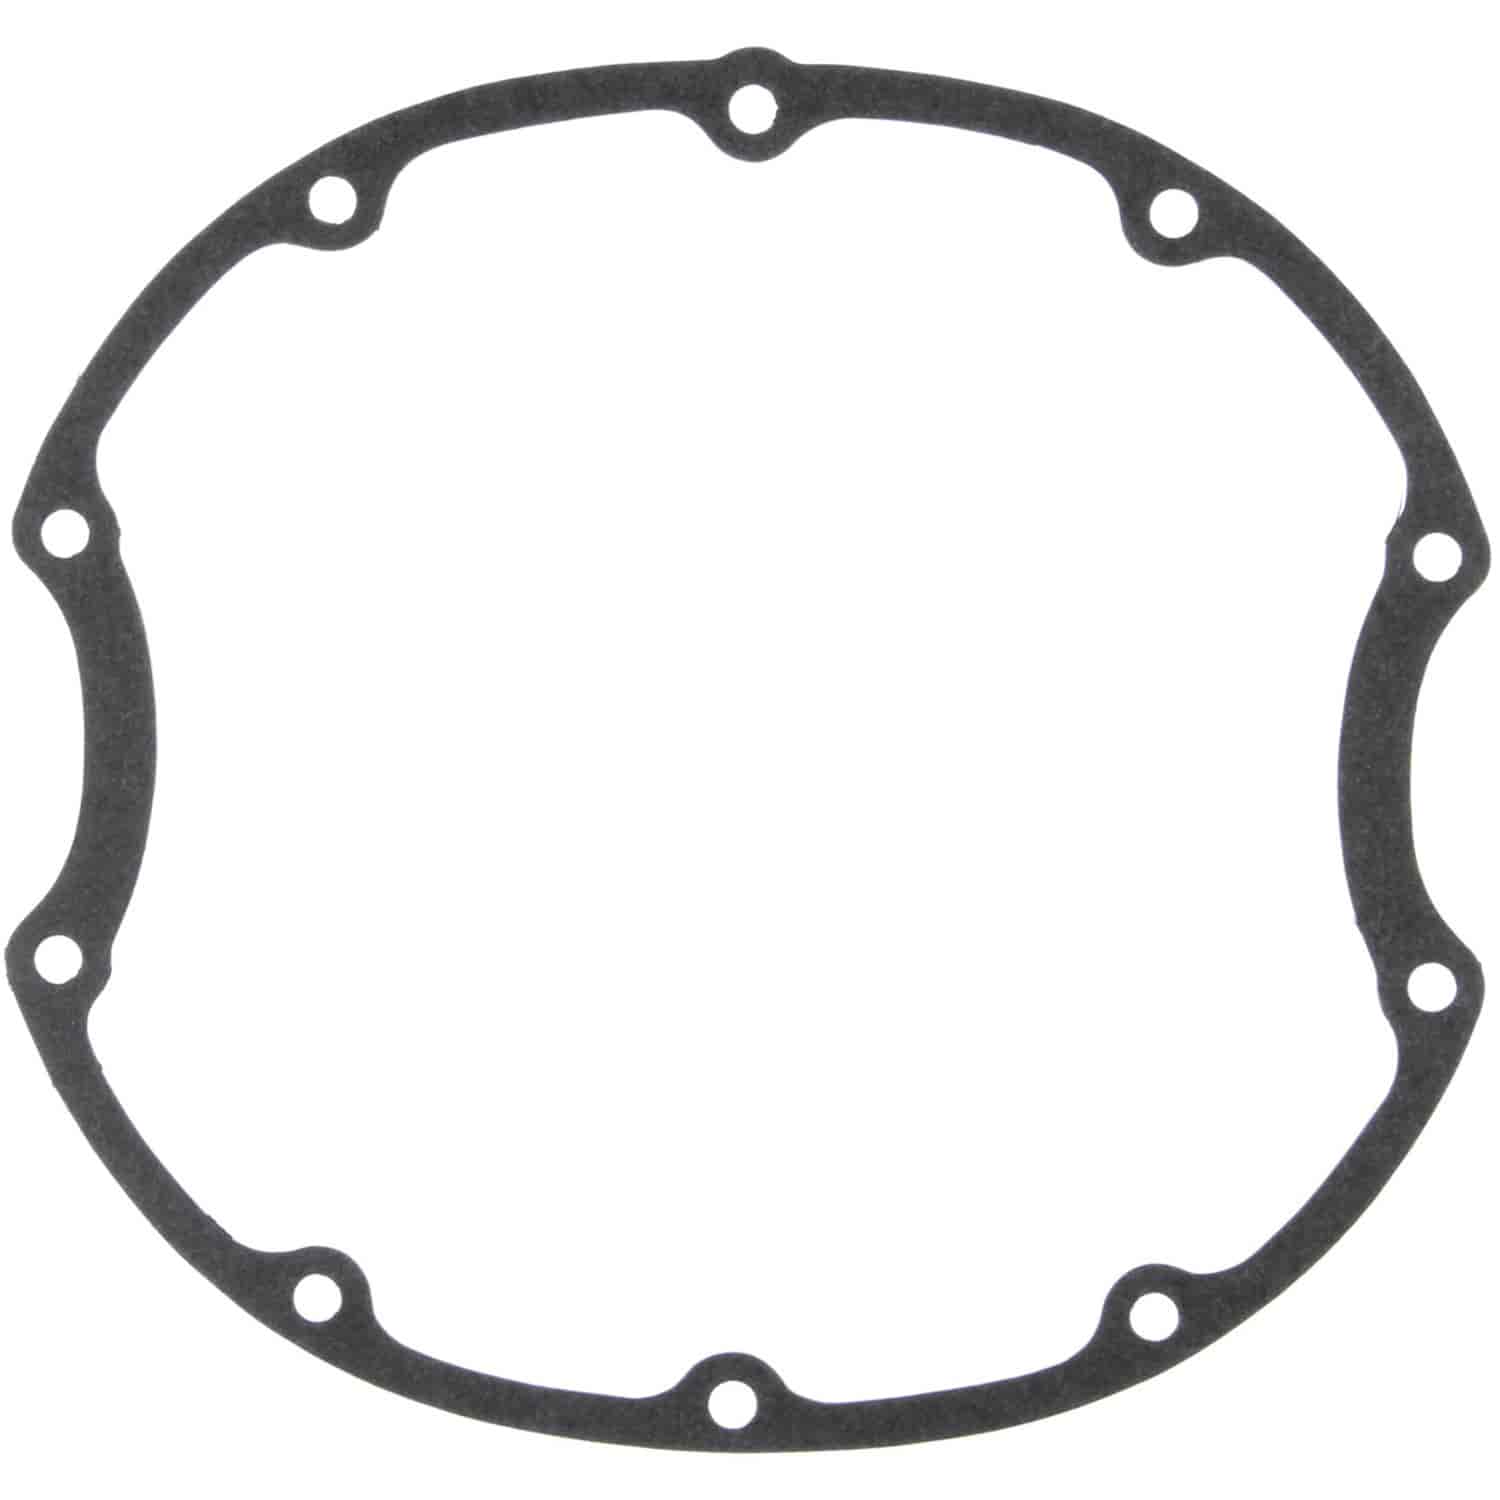 Axle Housing Cover Gasket Bui Chev Olds Pont F85 64-72